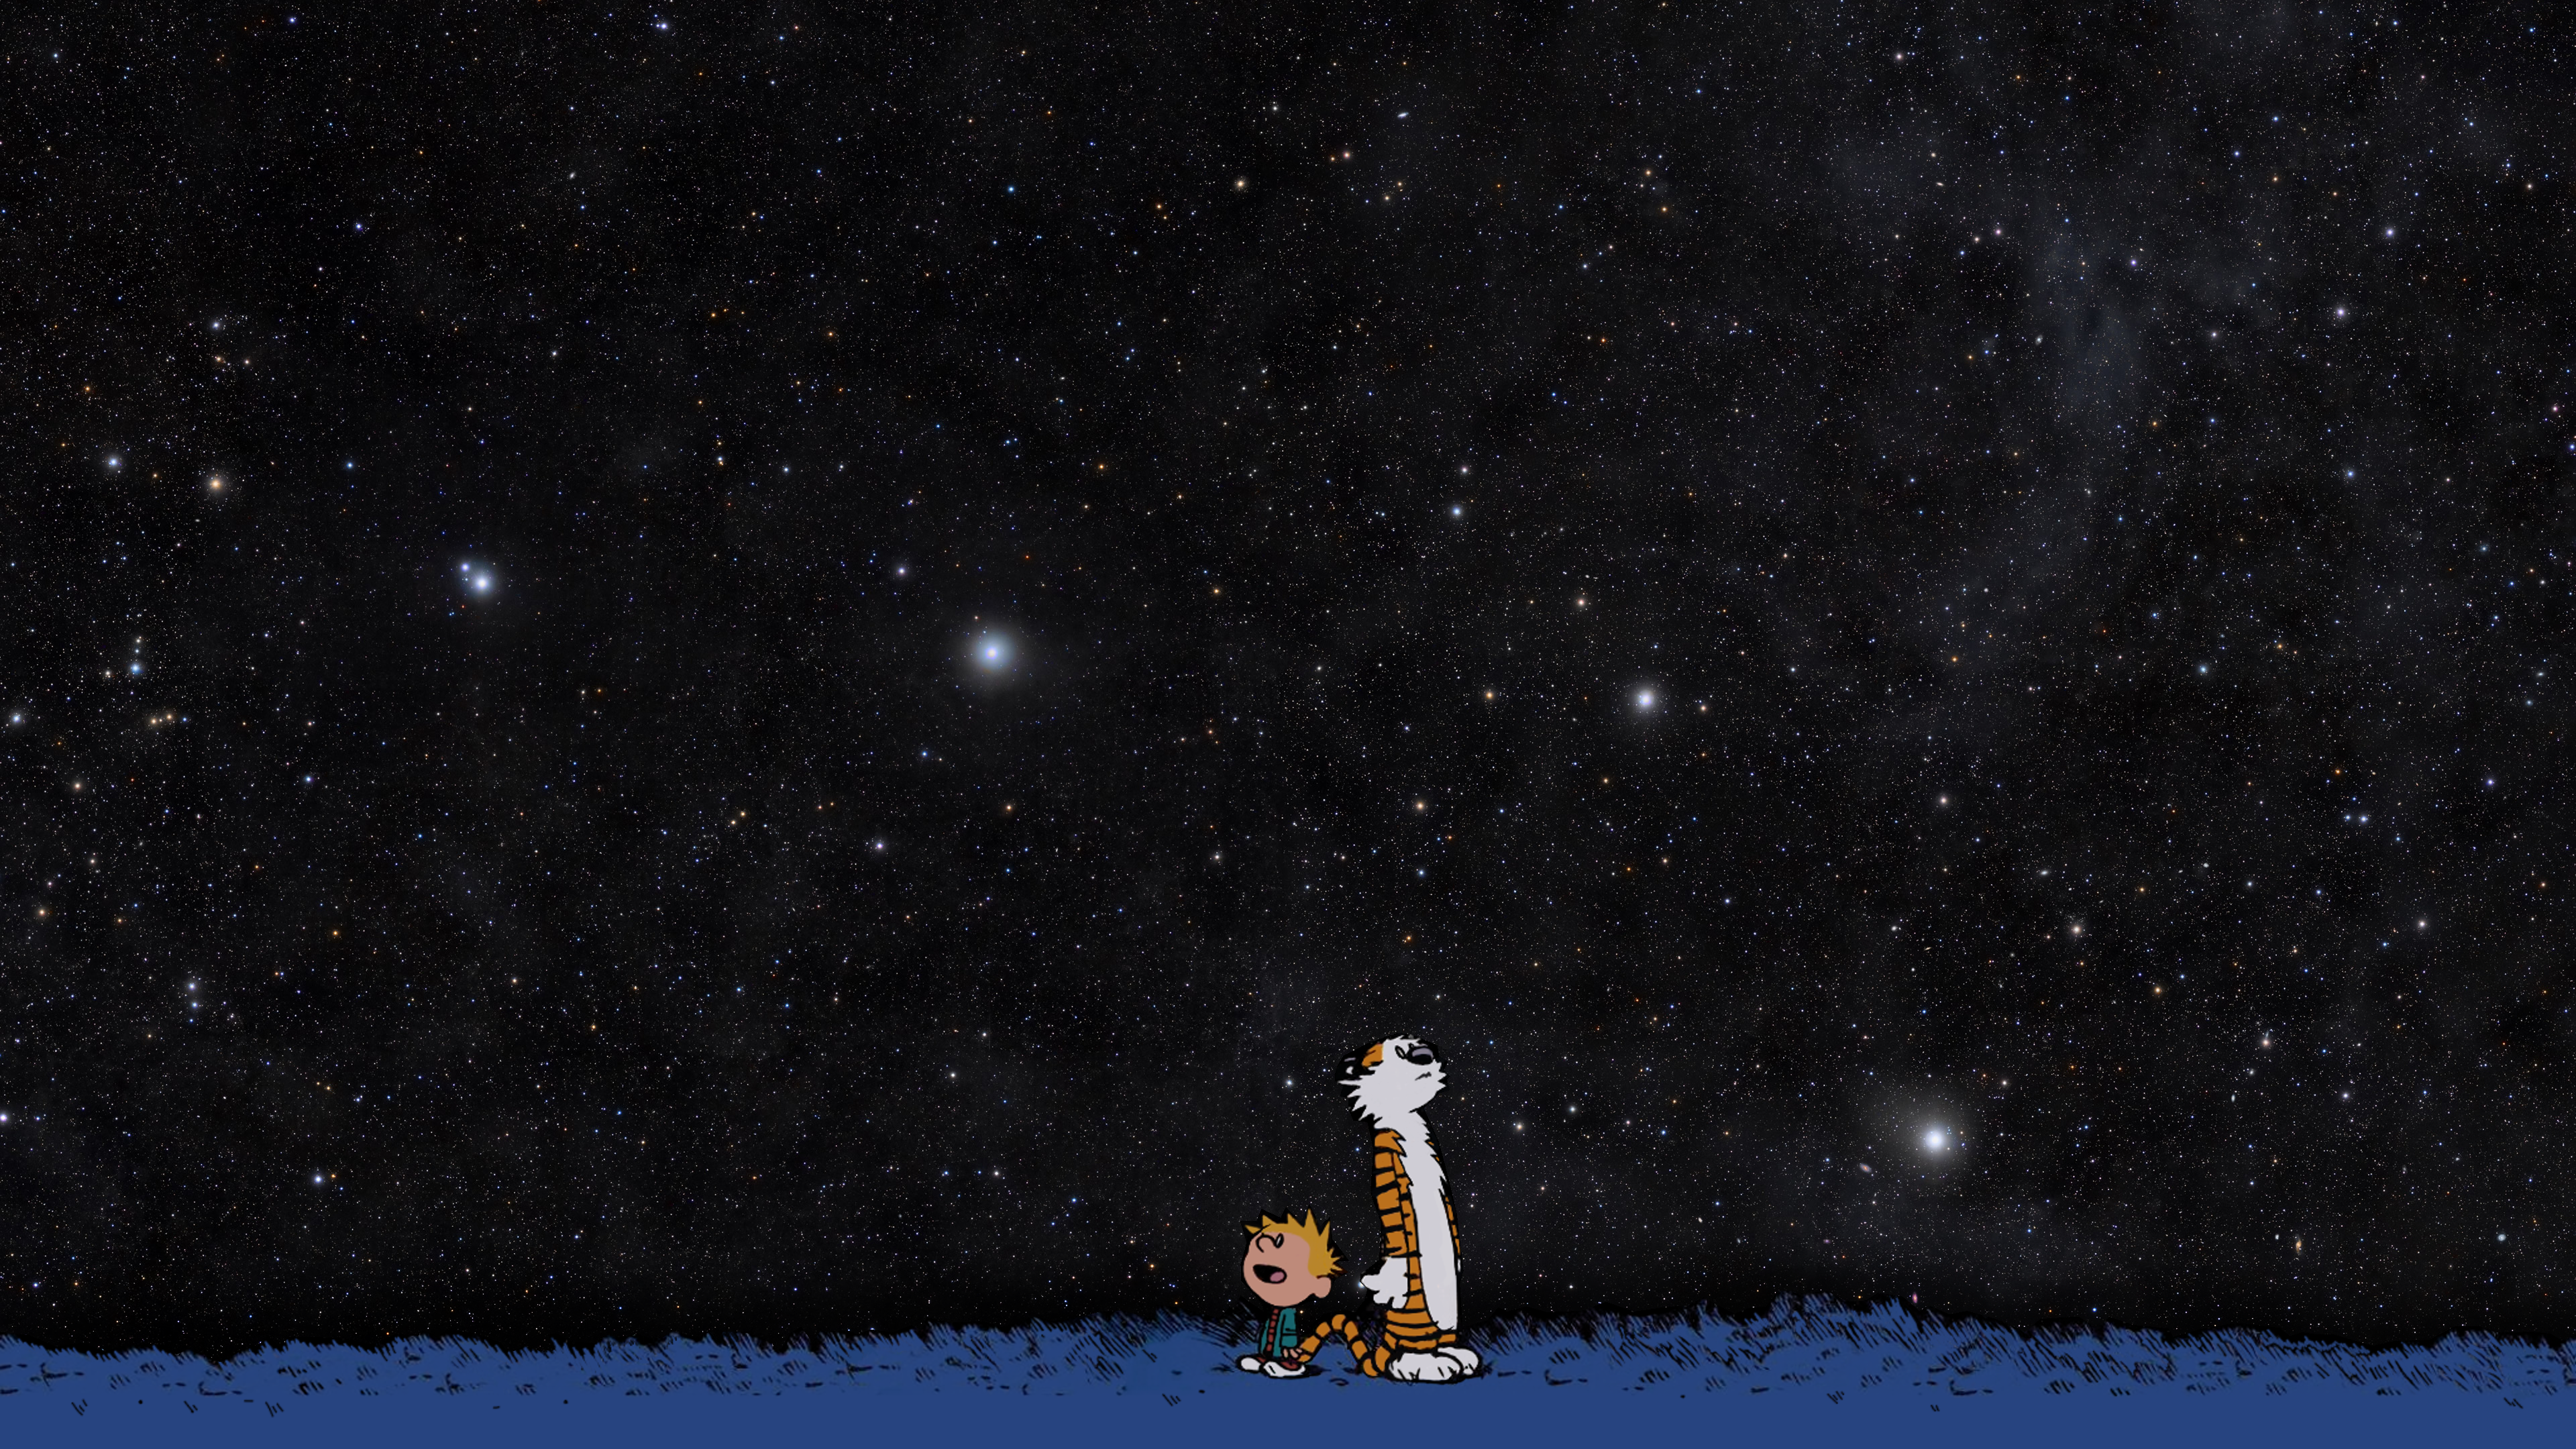 I Made A Nice 4k C&H Wallpaper. Thanks To U Vichen6058 For Giving Me The Inspiration!